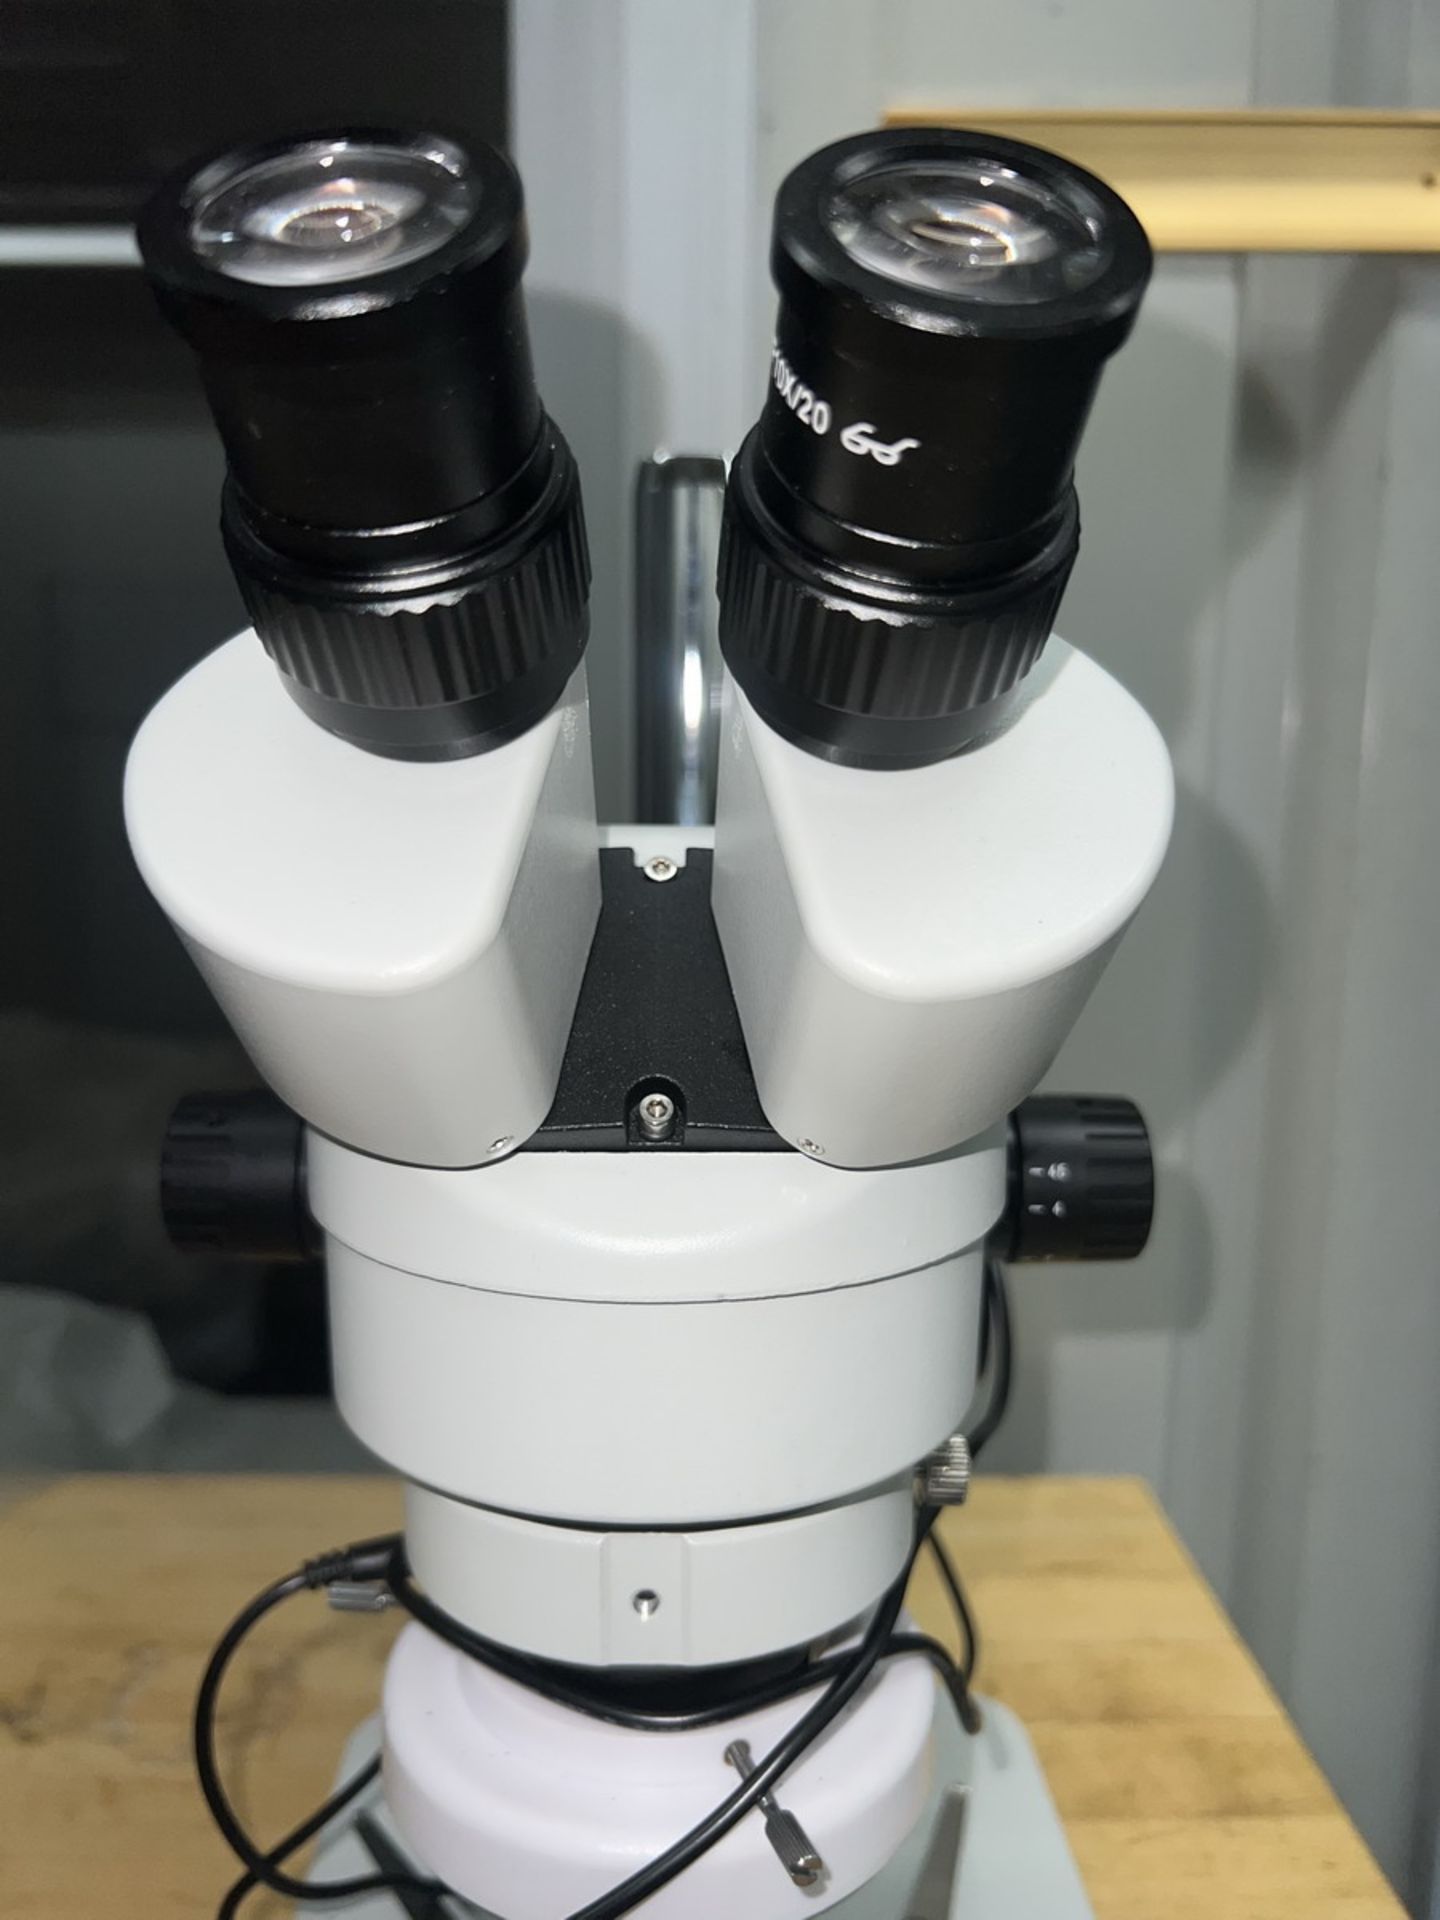 0.7x-4.5x Stereo Zoom Microscope - Image 5 of 6